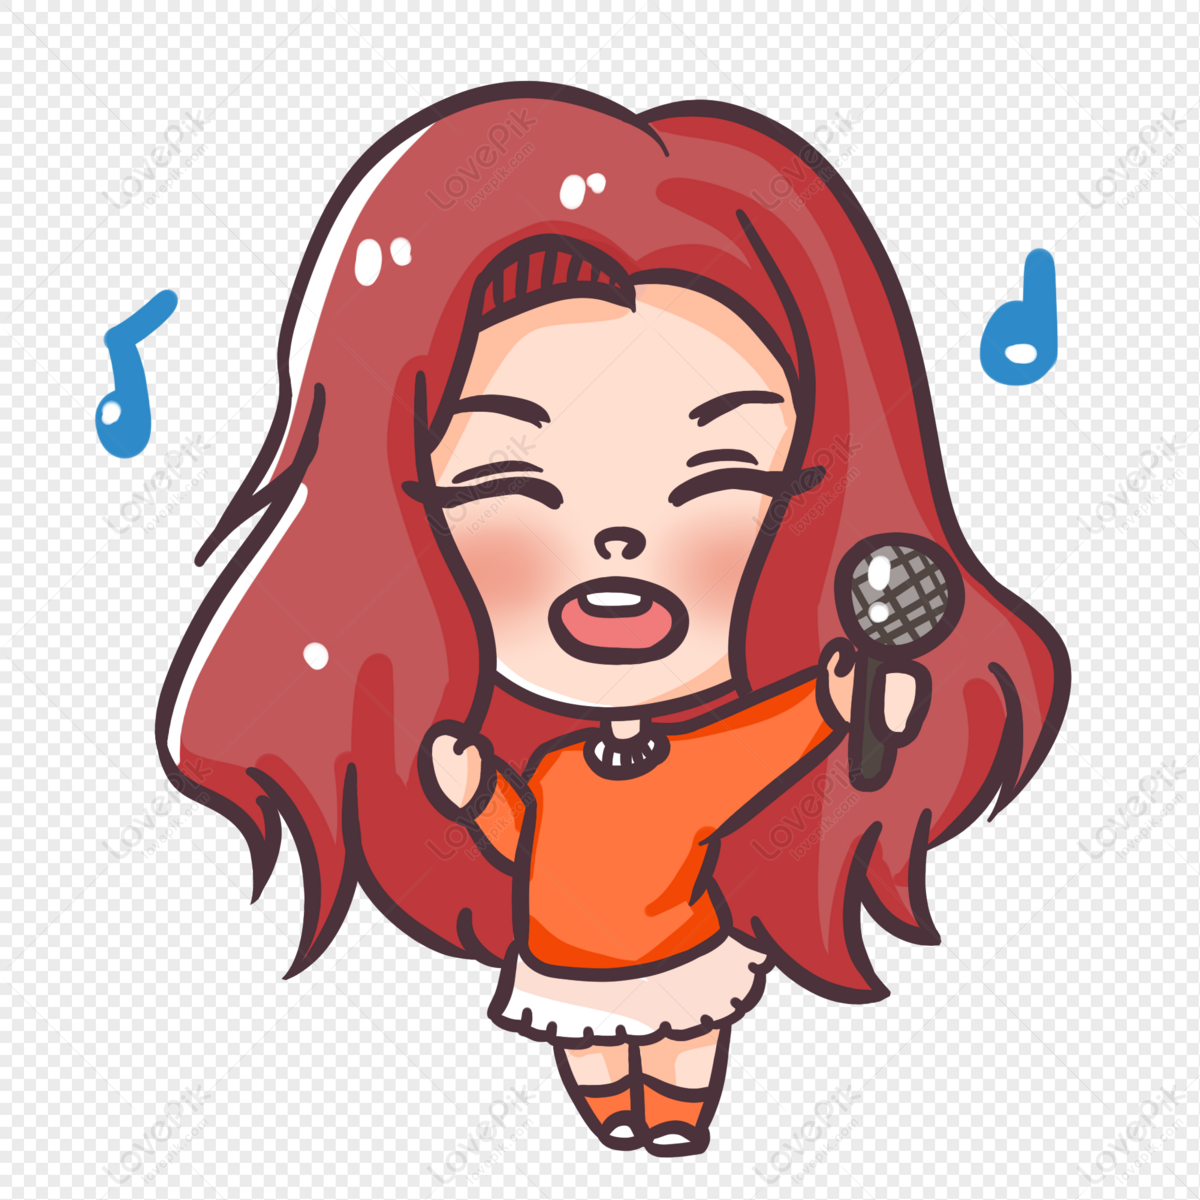 Summer Training Singing Girl PNG Picture And Clipart Image For Free  Download - Lovepik | 401528065